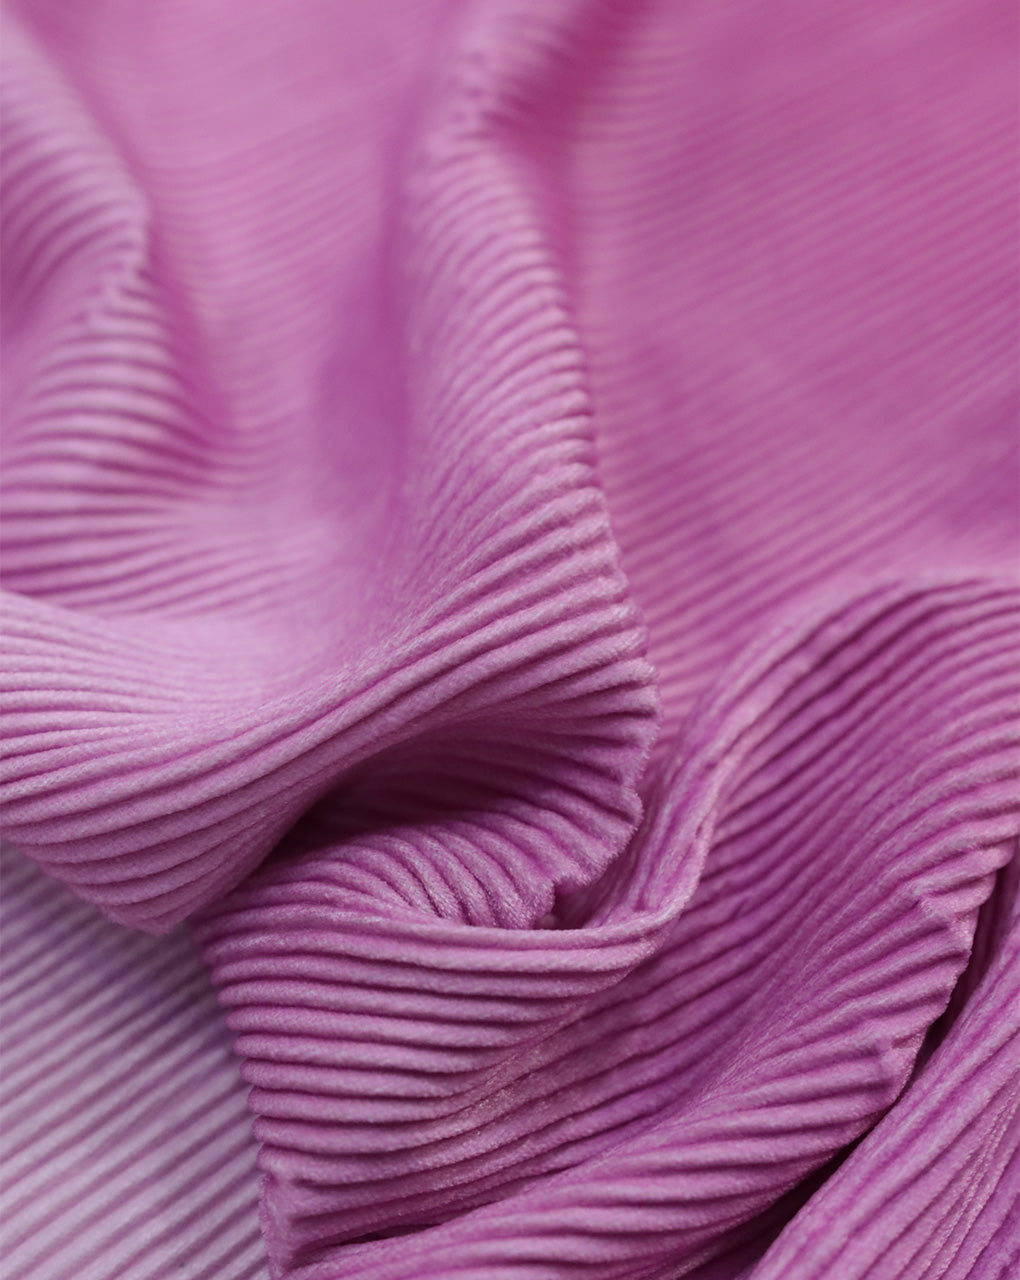 PINK OMBRE PATTERN POLYESTER PLEATED VELVET FABRIC